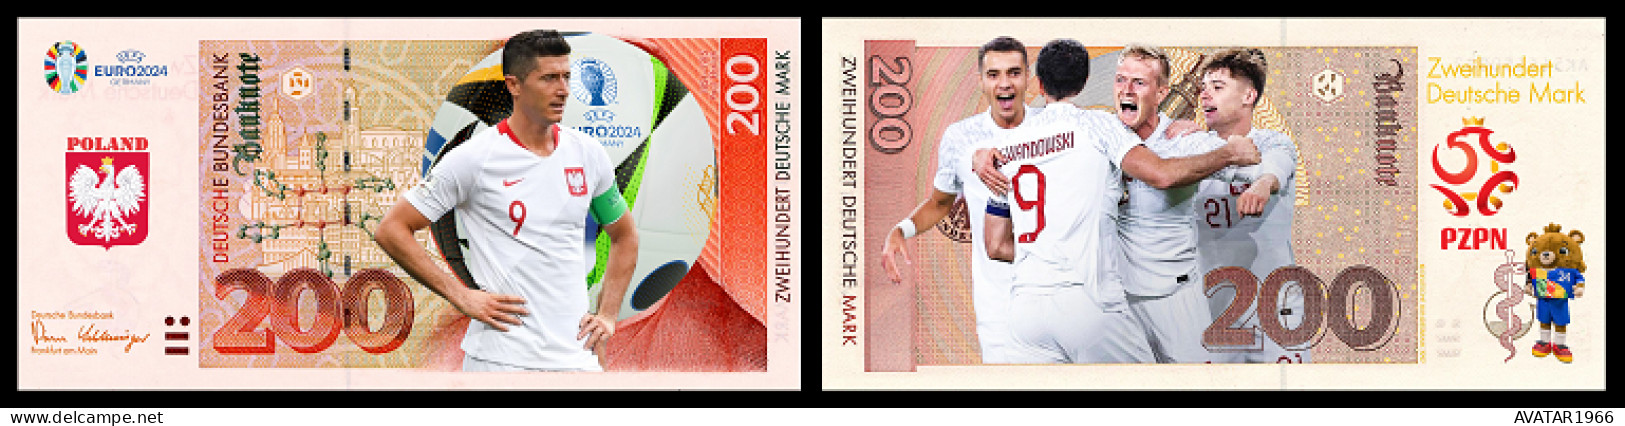 UEFA European Football Championship 2024 qualified country  Poland  8 pieces Germany fantasy paper money